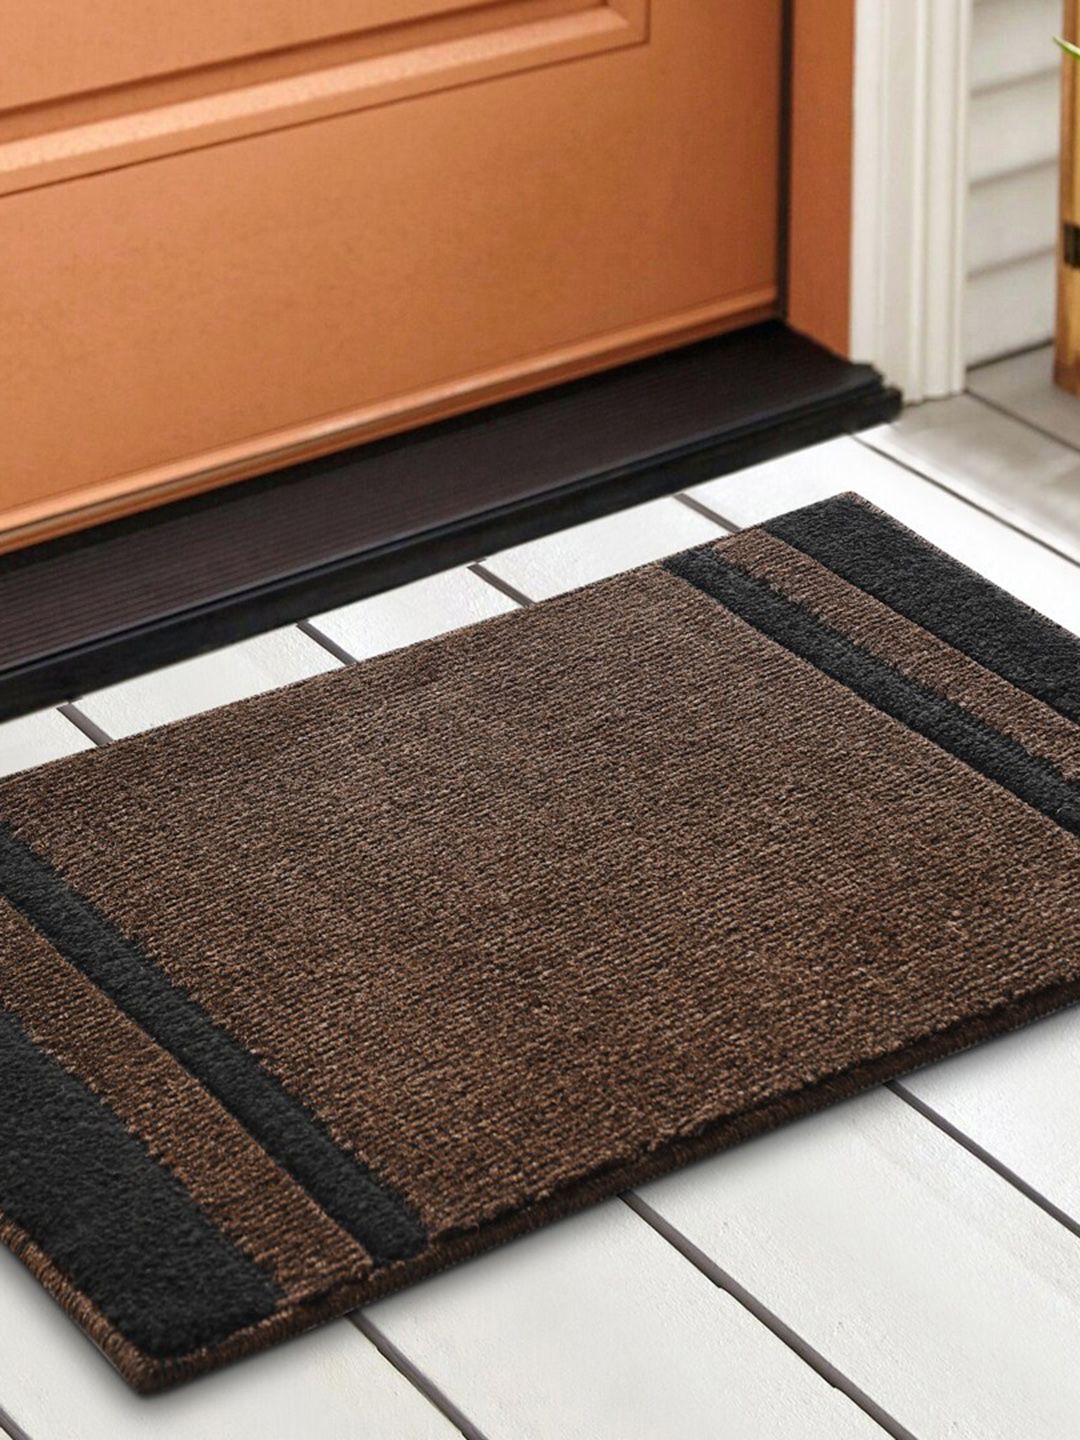 Saral Home Brown & Black Colourblocked Cotton Anti-Skid Doormats Price in India